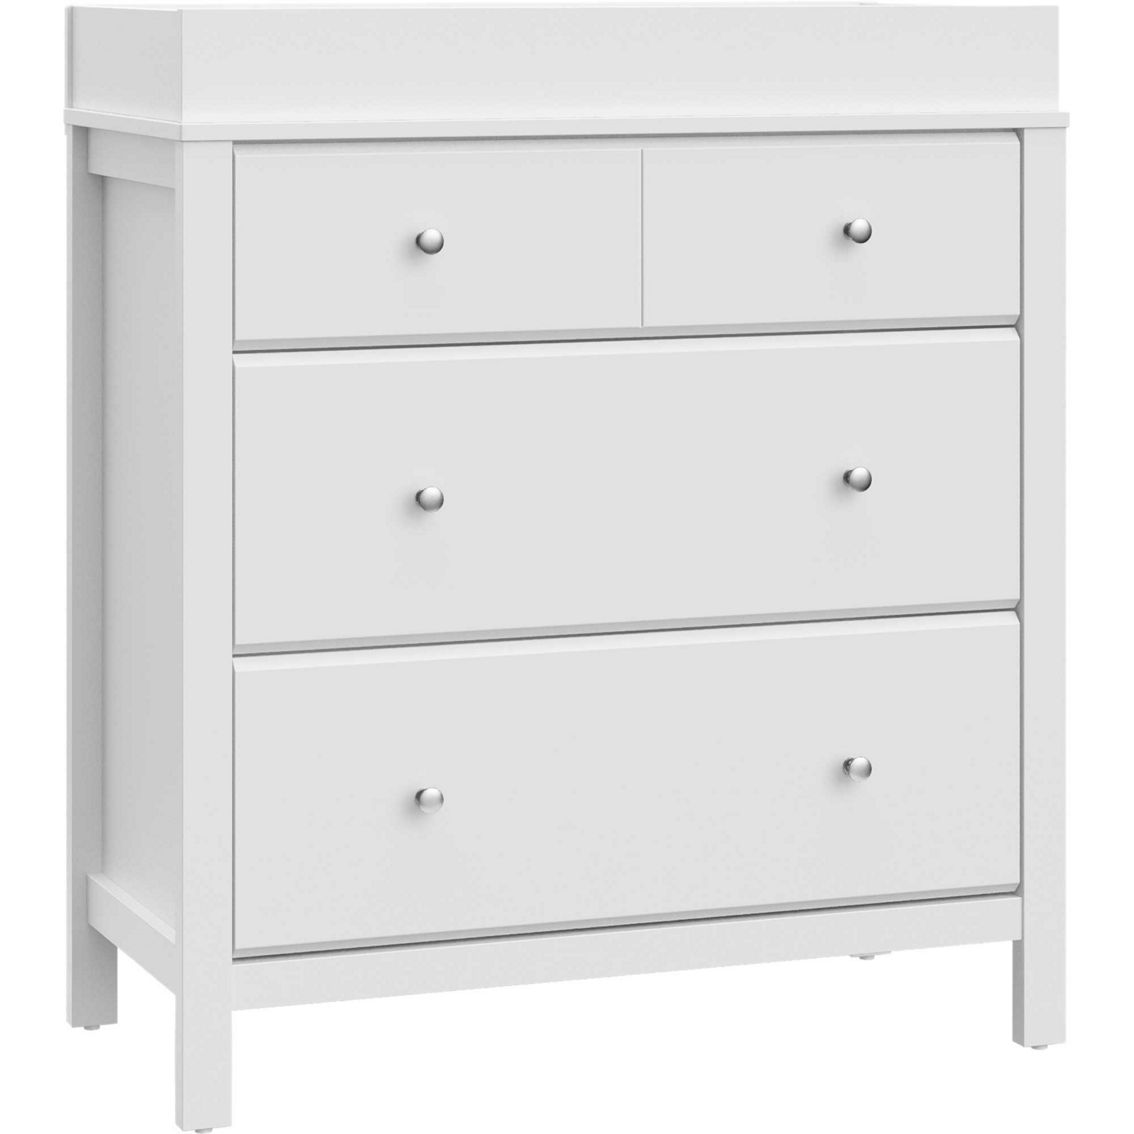 Storkcraft Carmel 3 Drawer Chest with Changing Topper - Image 2 of 9